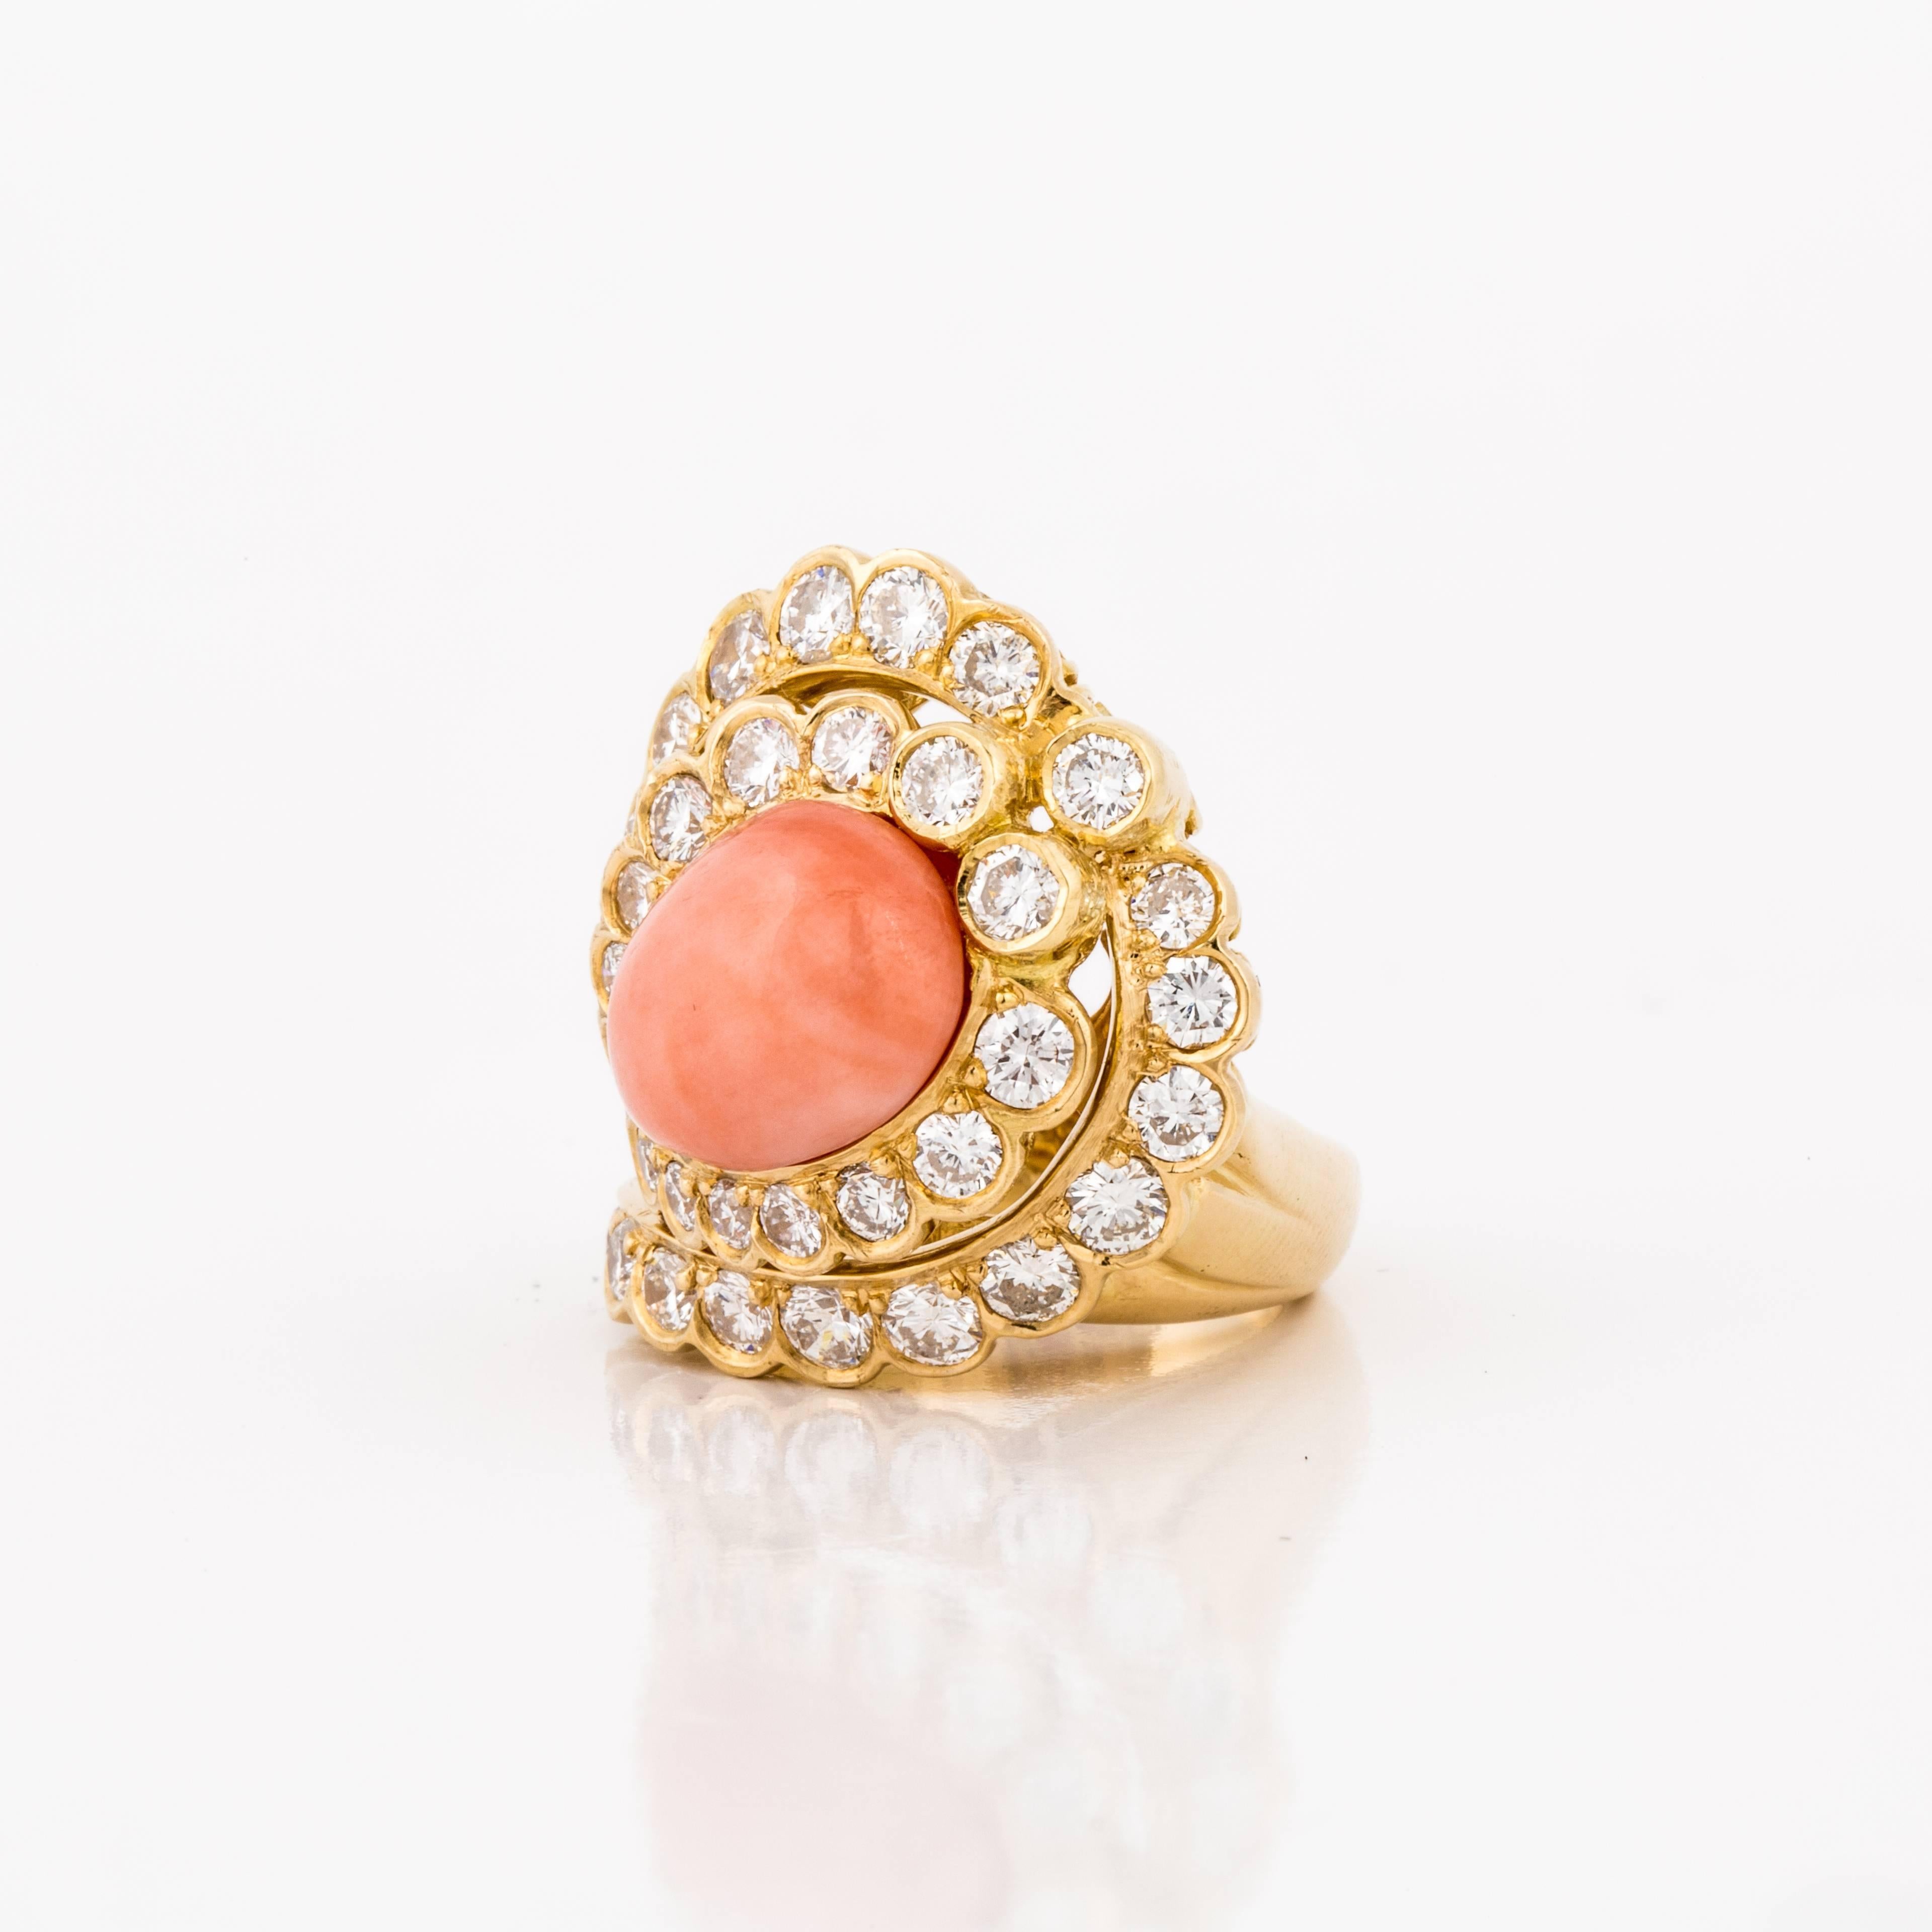 18K yellow gold ring featuring coral framed by round brilliant-cut diamonds.  The diamonds total 3.25 carats, F-H color and VS1-SI1 clarity.  The presentation area is 1 1/8 inch by 1 inch.  The ring is currently a size 6 and may be re-sized.